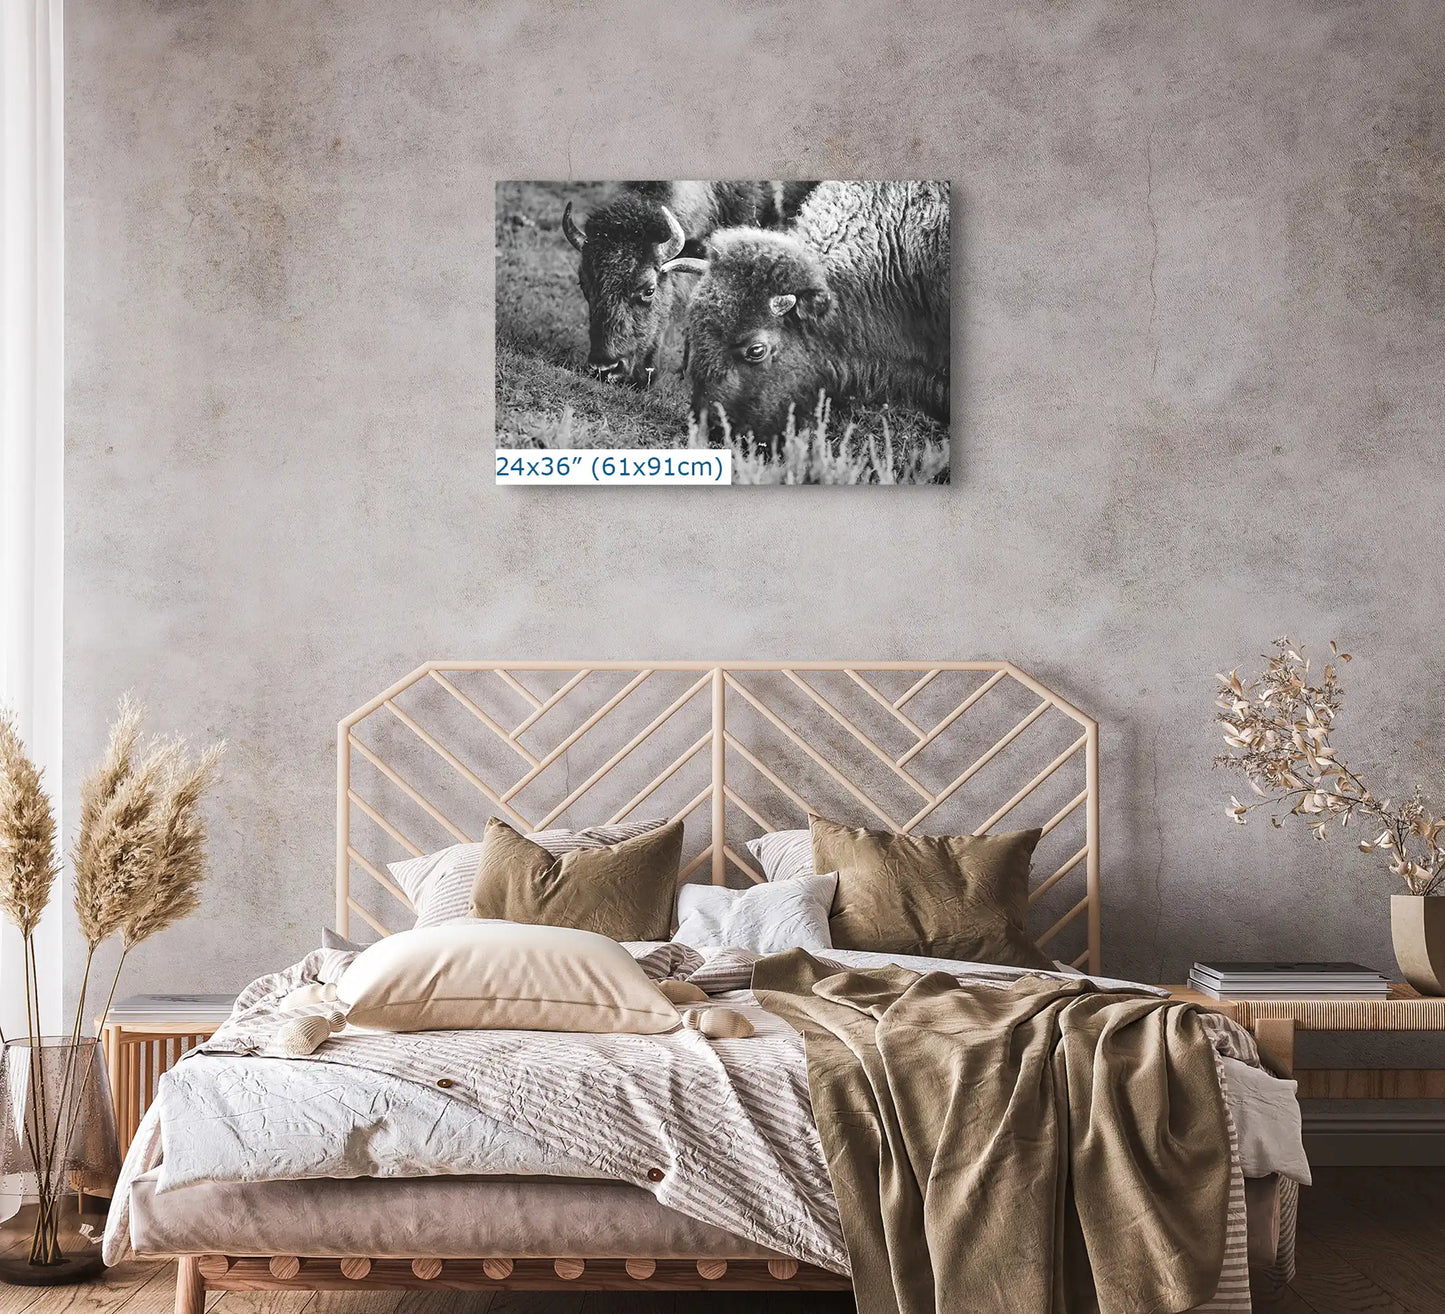 A 24x36 canvas print of a black and white bison photograph above a bed, creating a natural and calm bedroom setting.